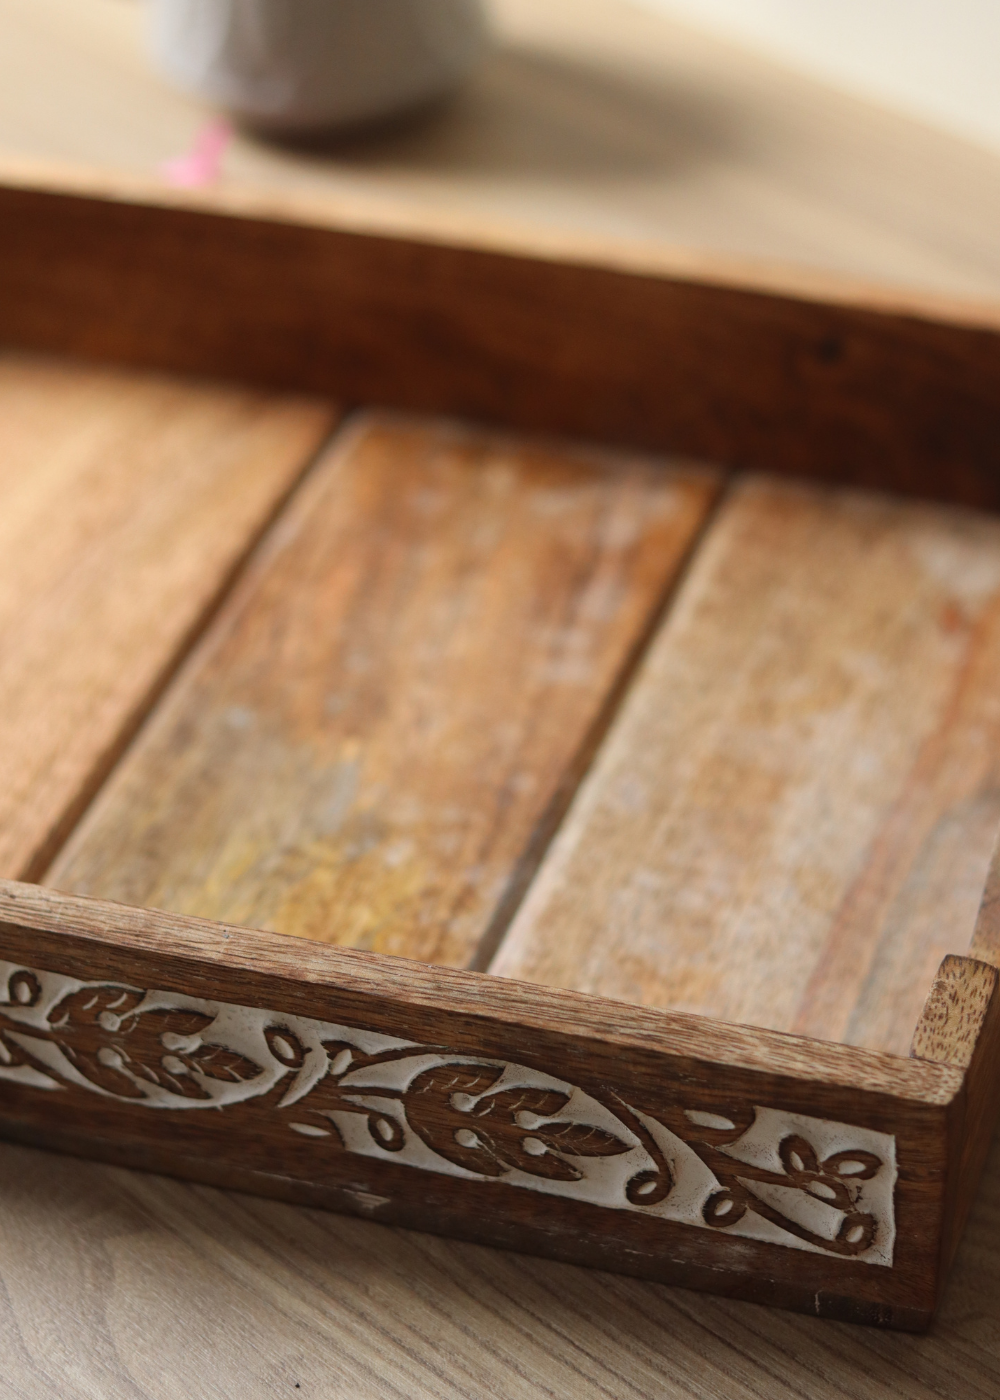 Wooden Carved Tray